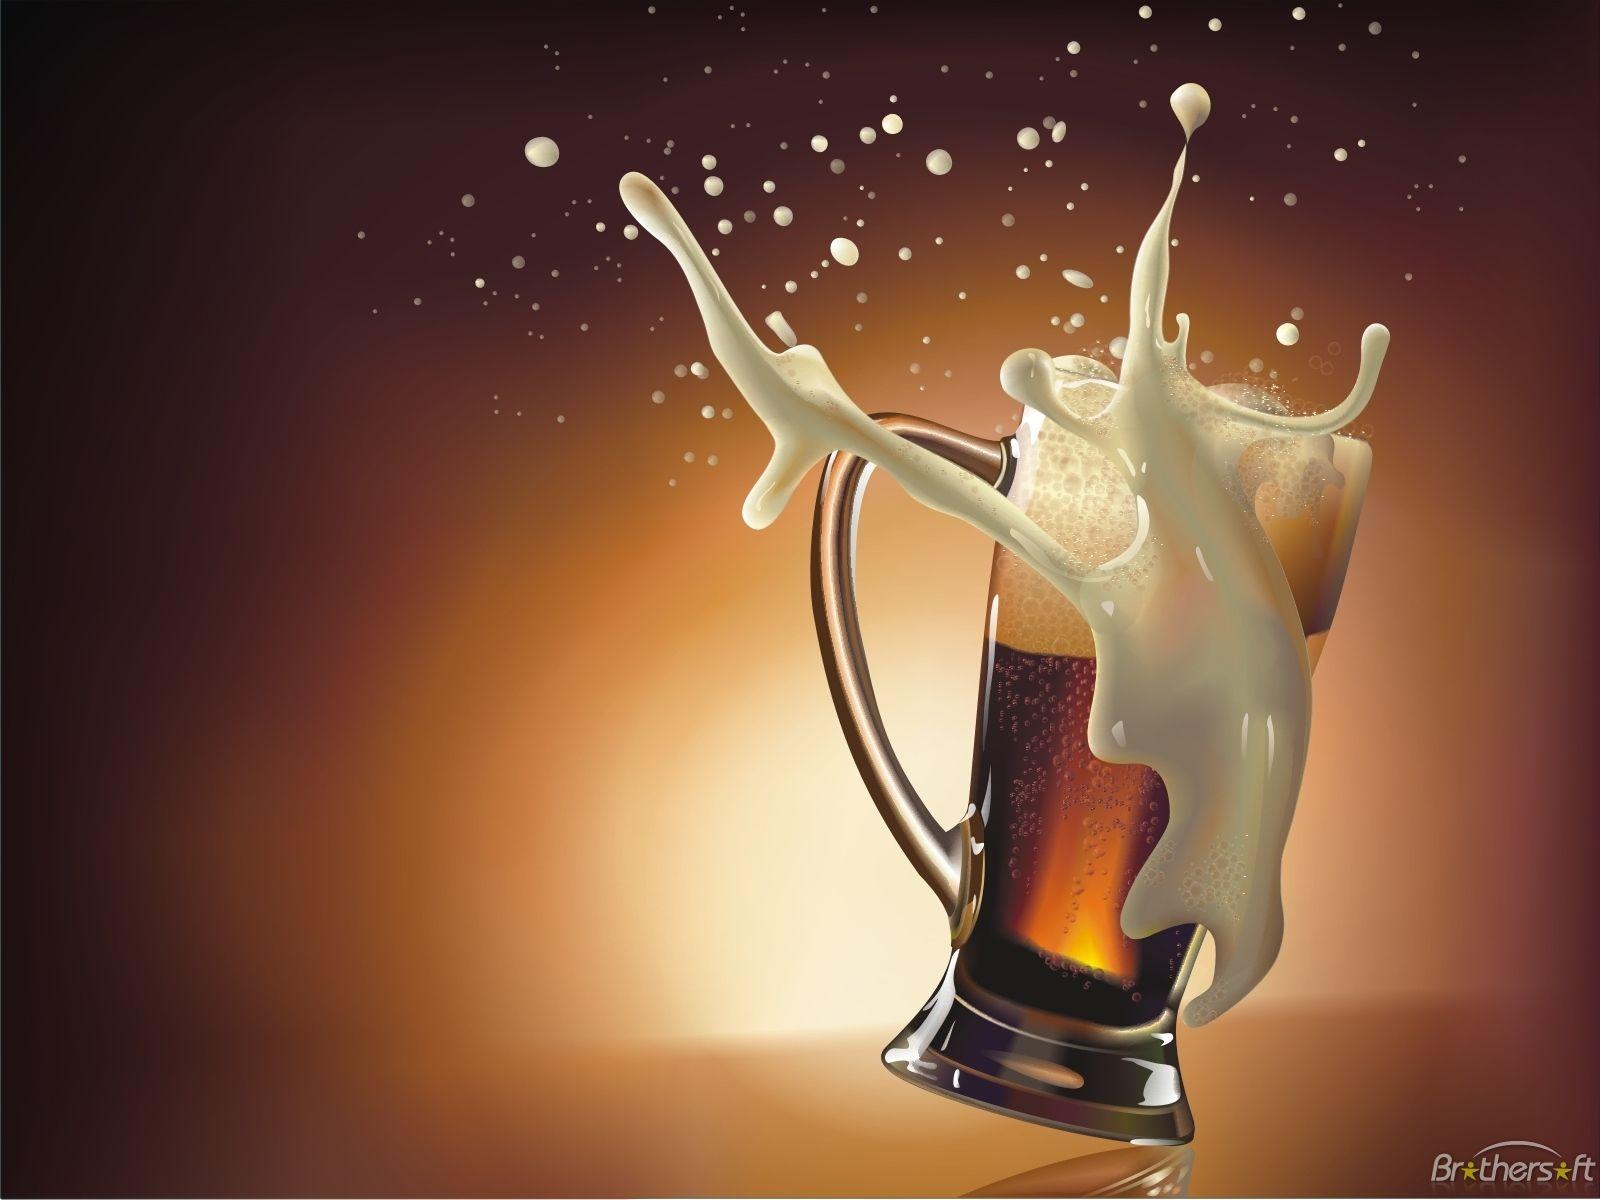 International Beer Day Image, Picture, Photo, Wallpaper